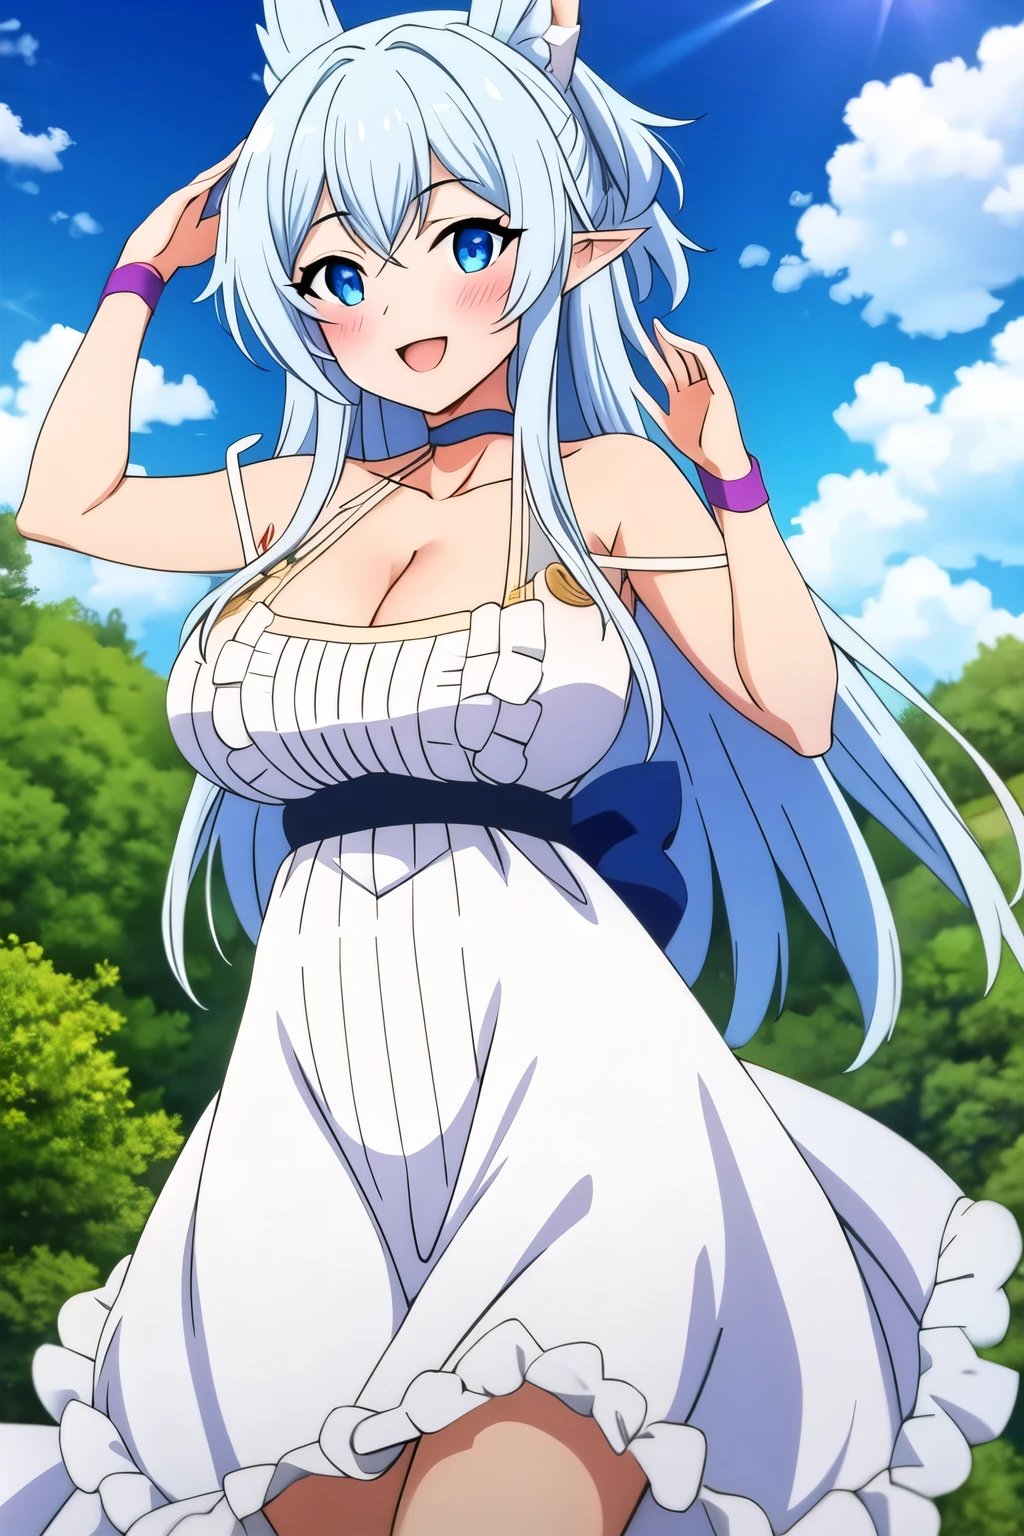 ((Masterpiece, highest quality: 1.2), detailed image, anime character, one girl, blue eyes, rich breasts, white dress, close-up of face, animal ears covered with white fur, long white hair